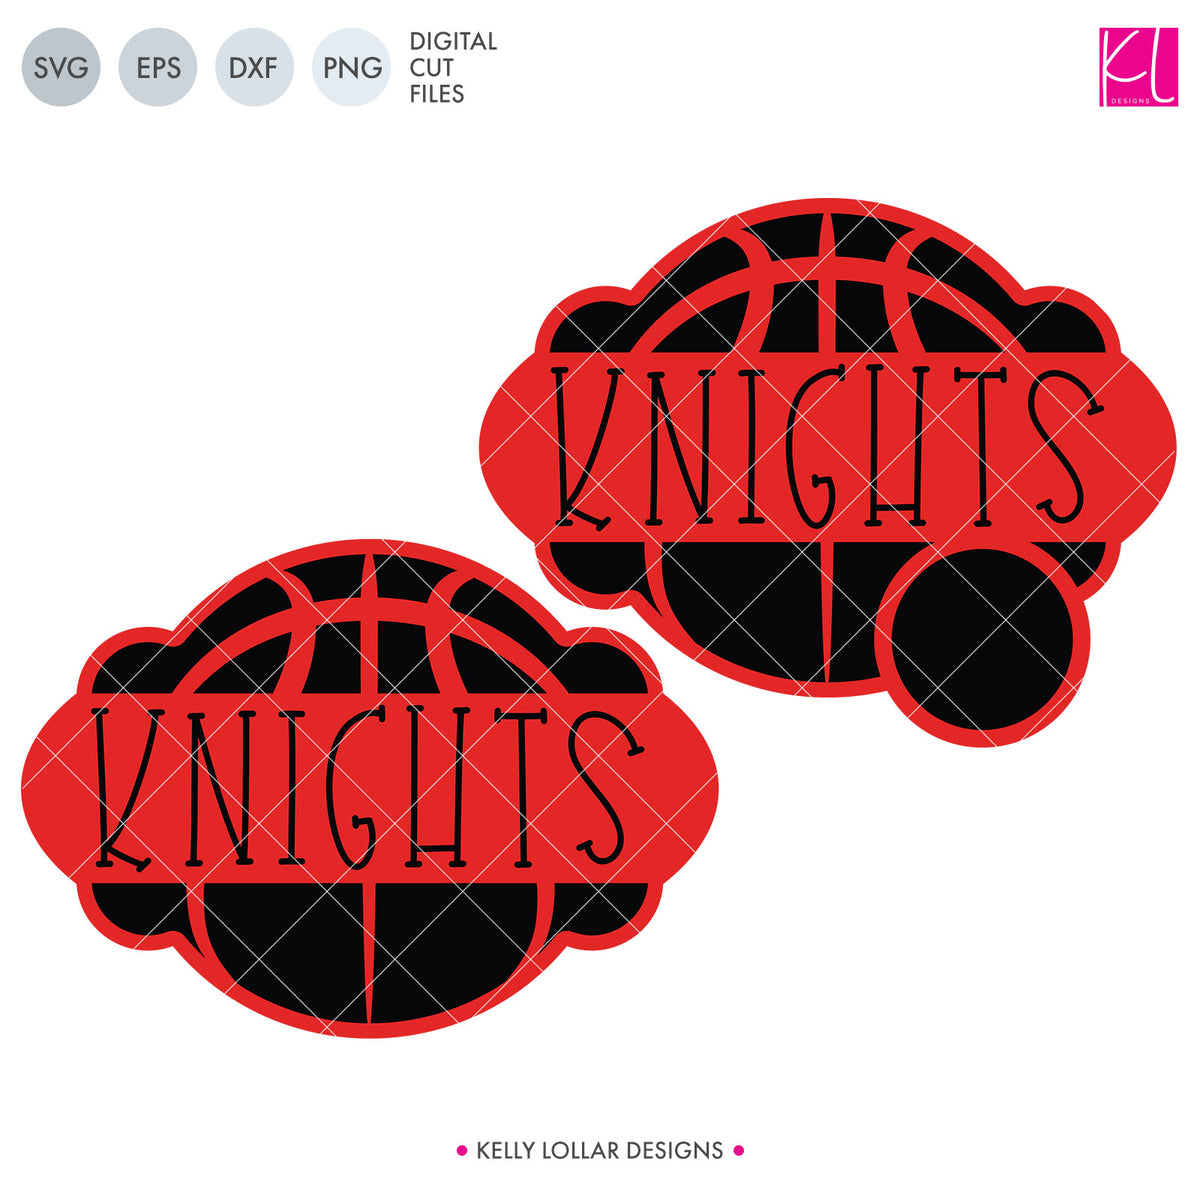 Knights Basketball Bundle | SVG DXF EPS PNG Cut Files